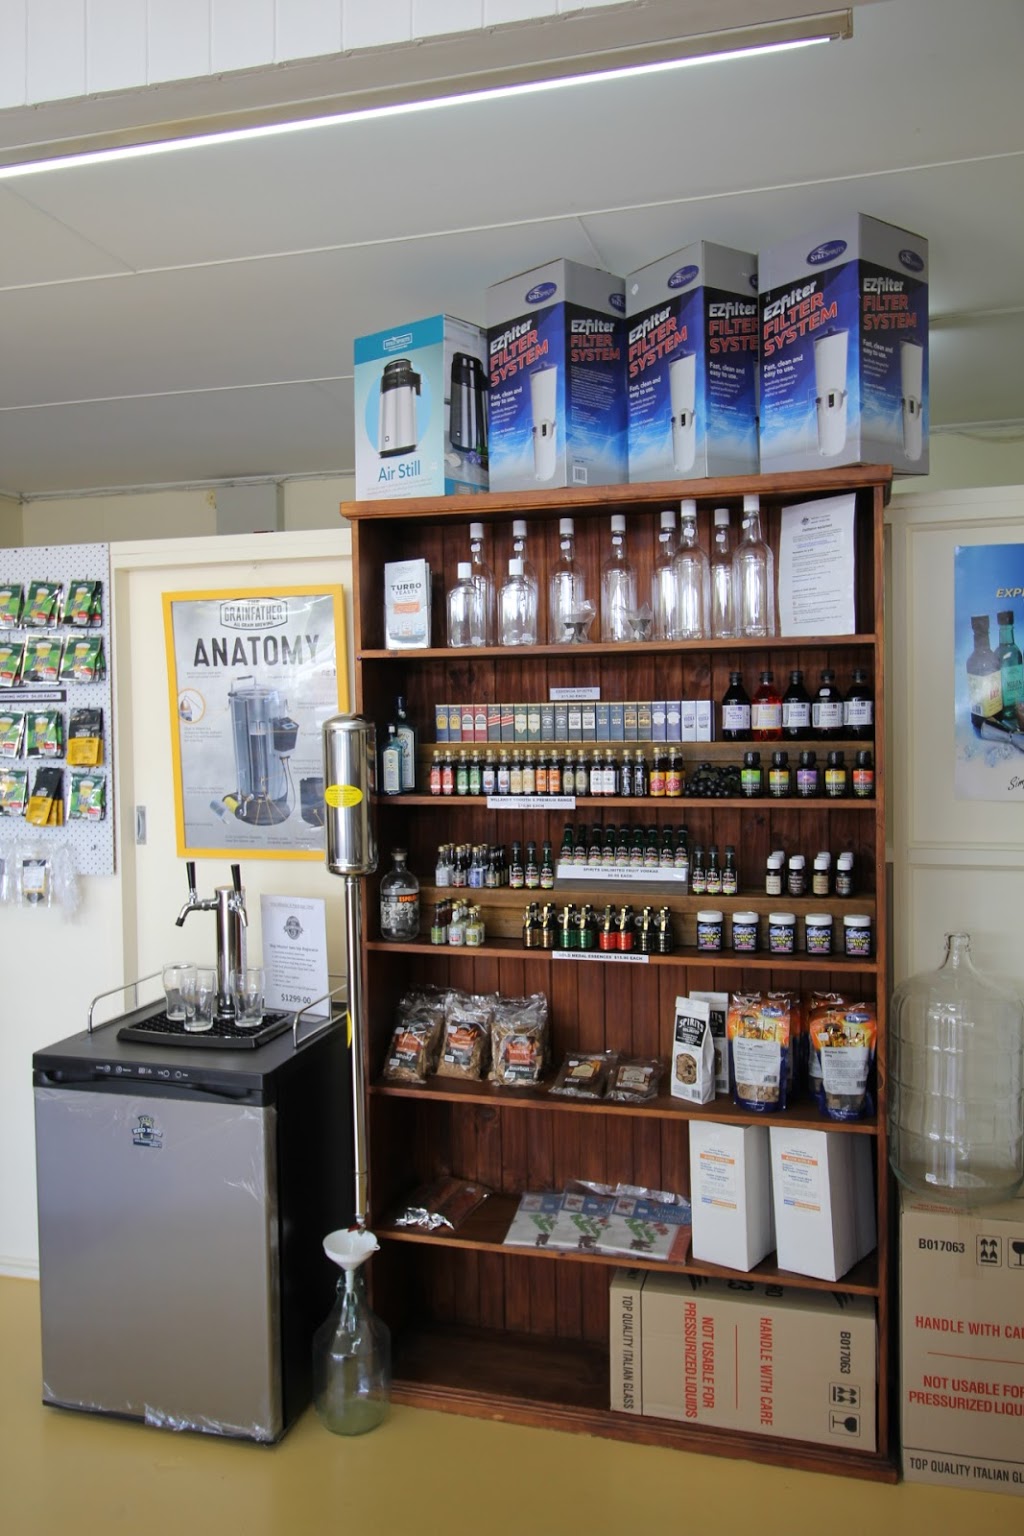 Malt n Bay Brewing Supplies | store | 1/335 Oxley Ave, Margate QLD 4019, Australia | 0732836844 OR +61 7 3283 6844